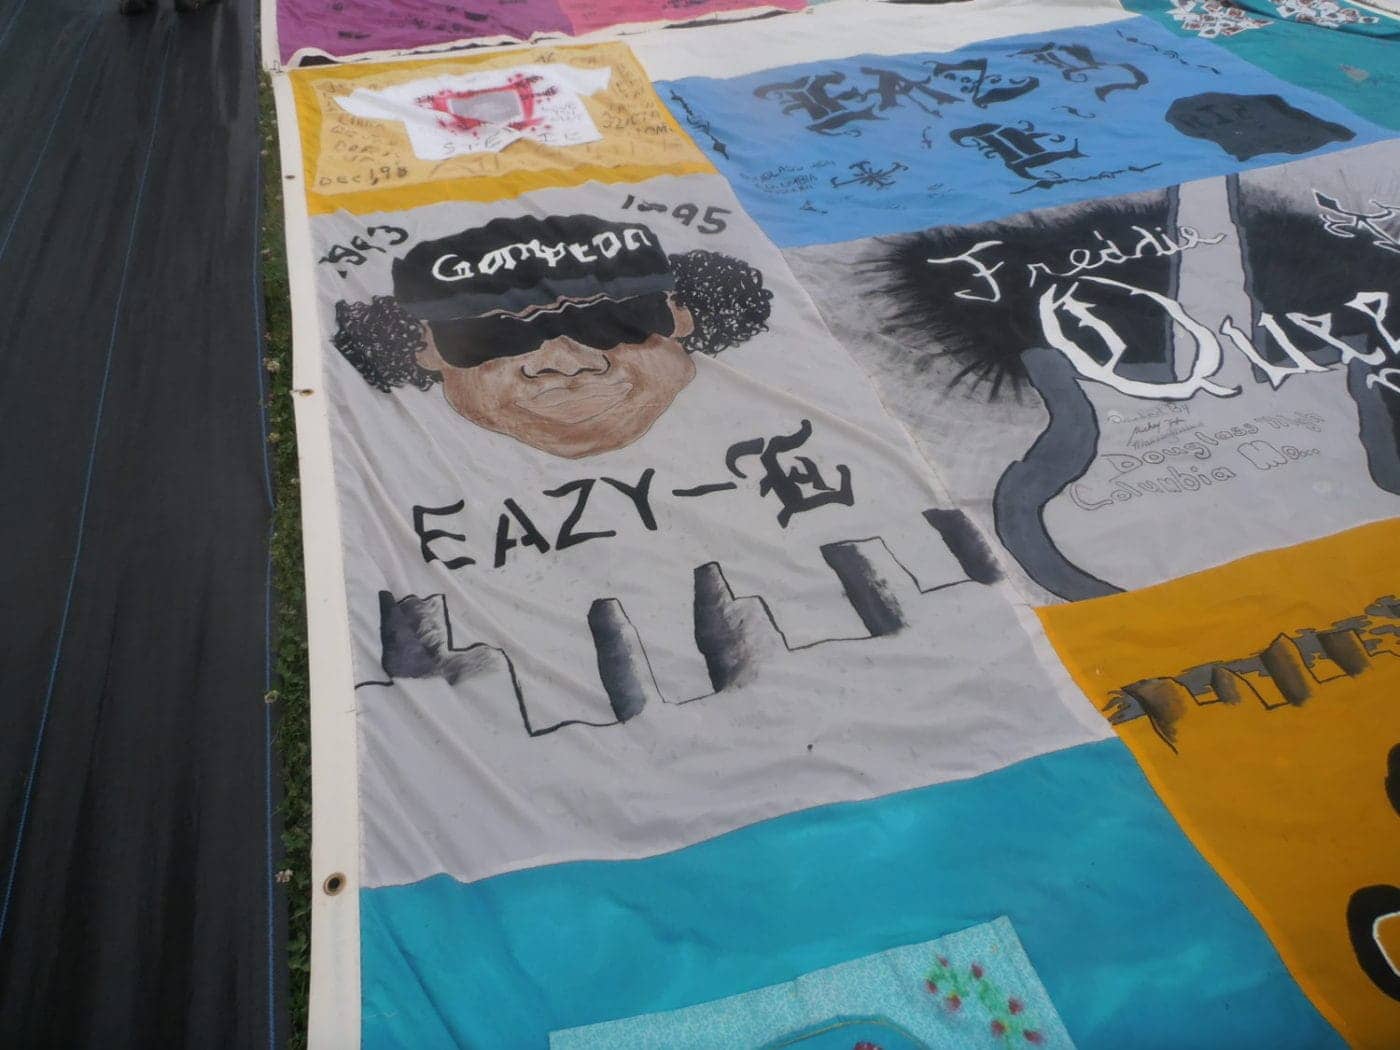 AIDS-Memorial-Quilt-in-Golden-Gate-Park-with-Eazy-E-panel-by-Jahahara-2022-1400x1050, Forward forever!, Culture Currents Local News & Views News & Views 